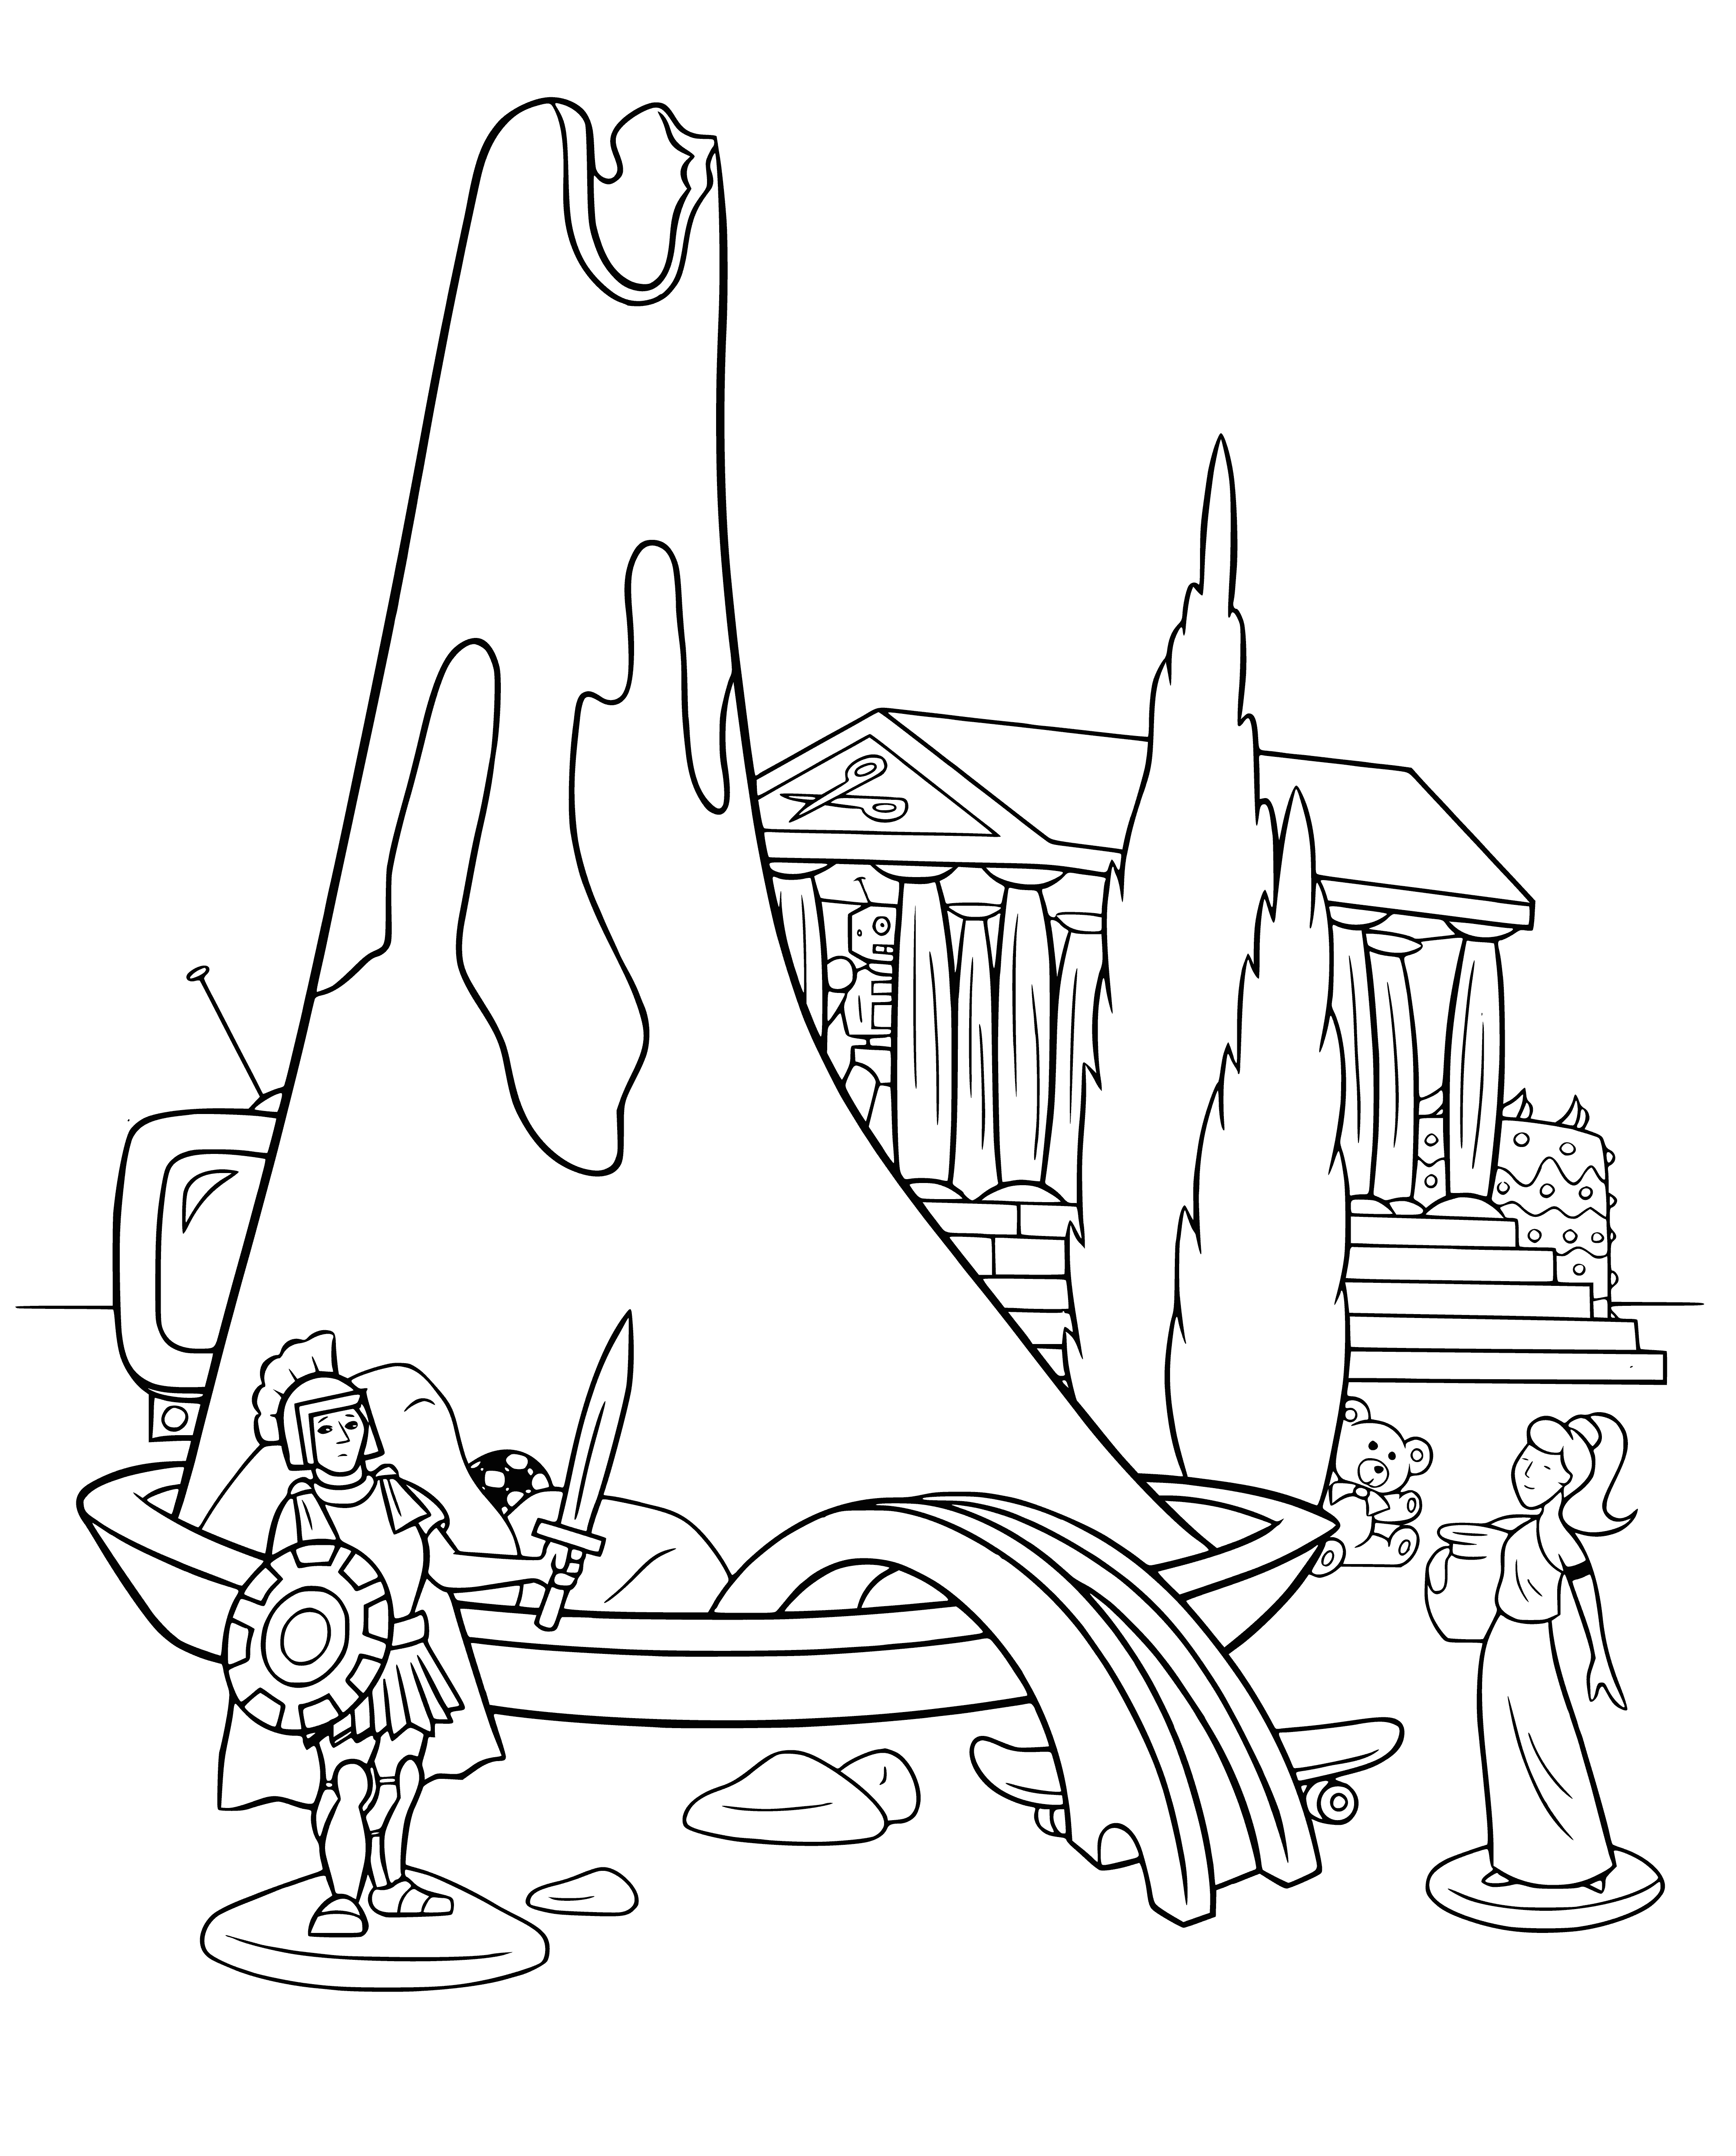 Volcano. Scale layout coloring page